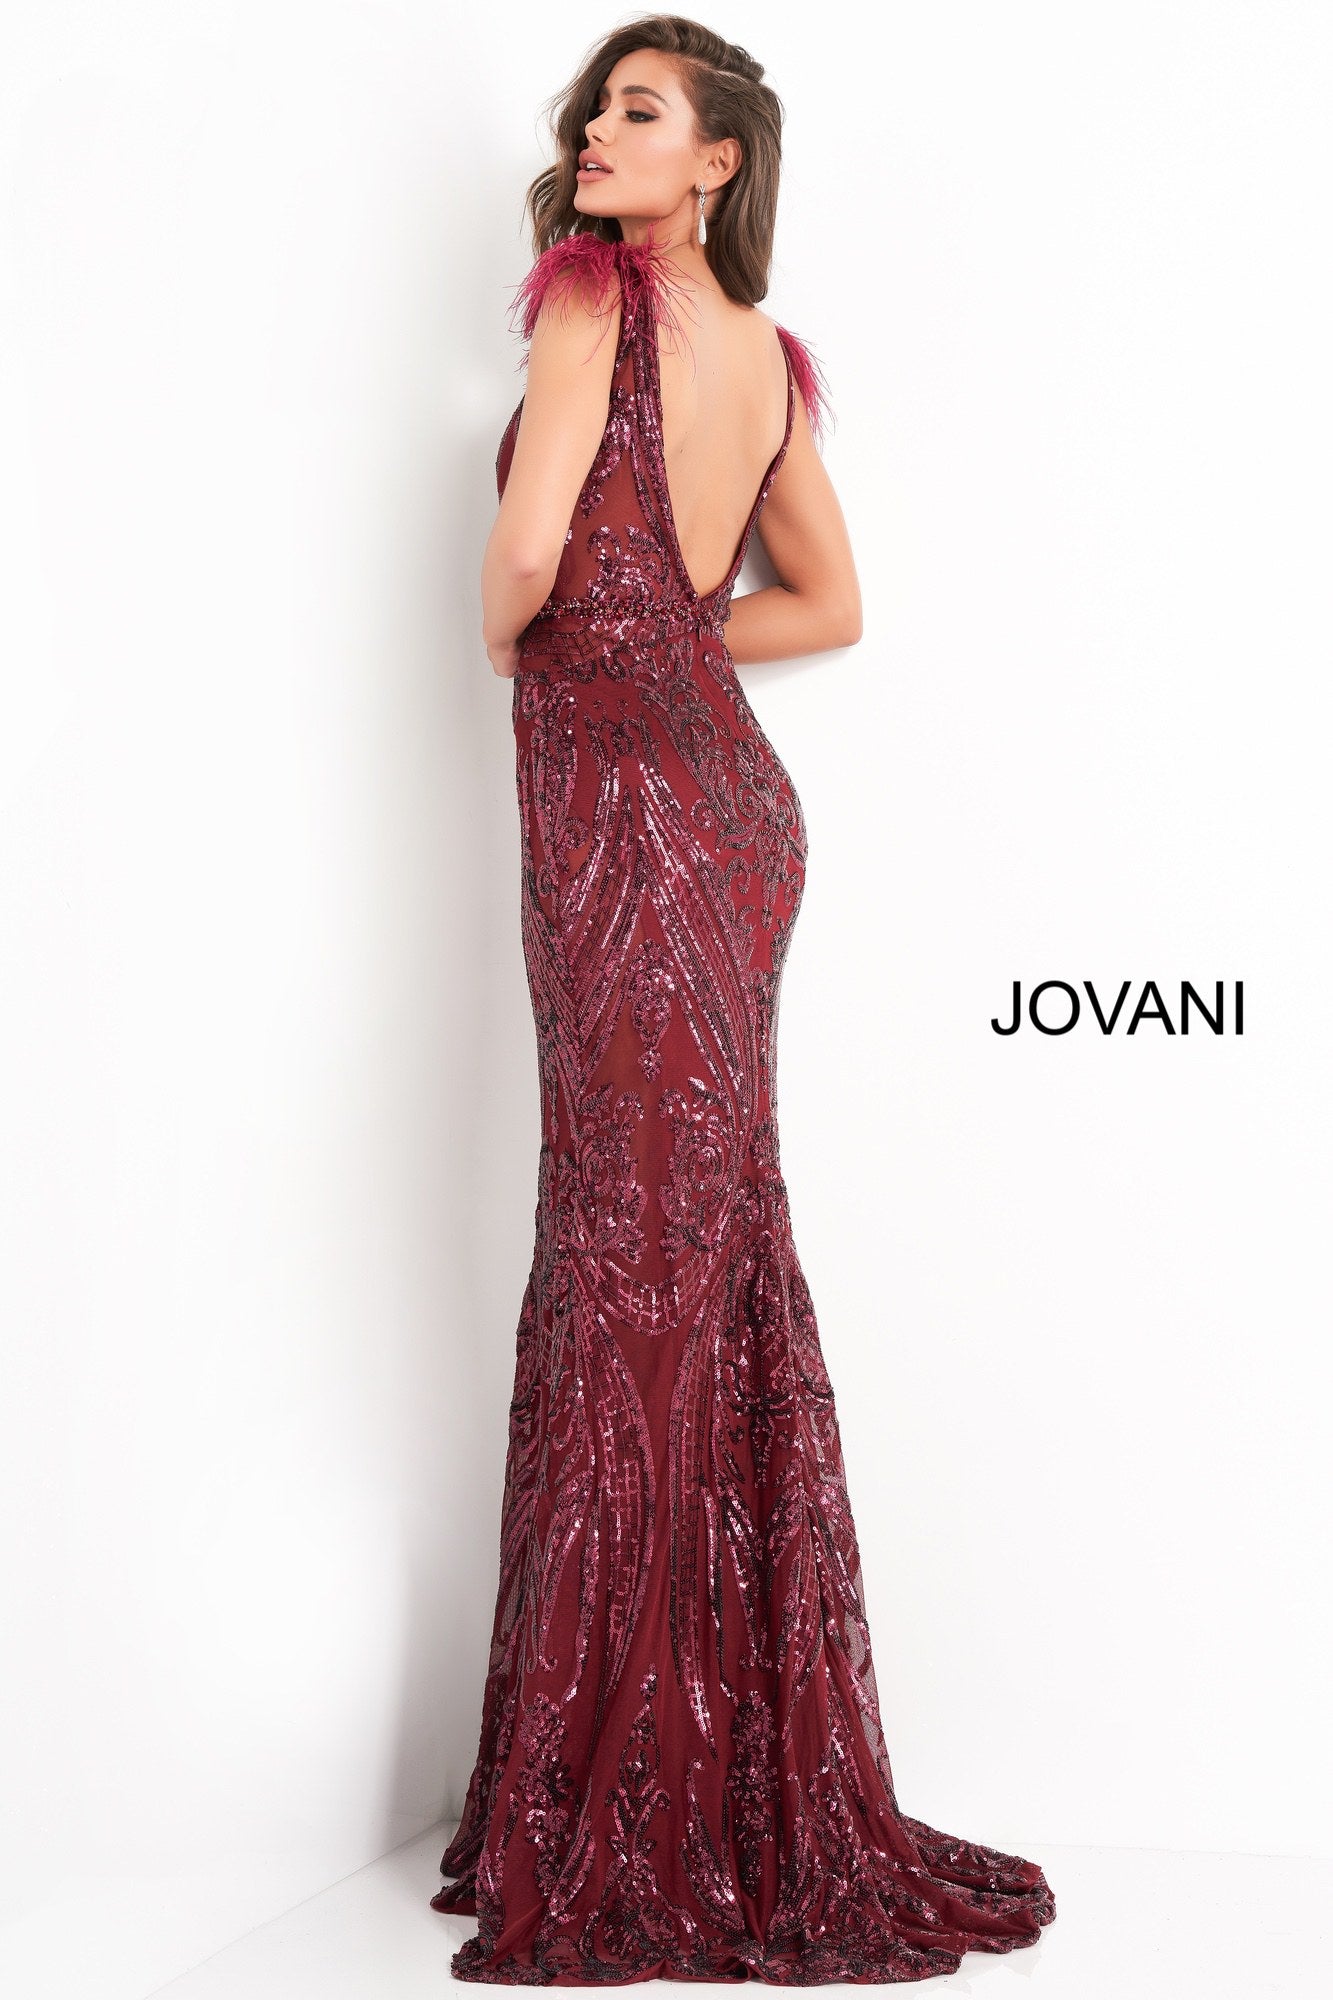 Jovani 3180 is a sequin prom dress, pageant gown & Formal evening wear. This gown features a sheer sequin embellished corset bodice with a plunging neckline. feathers accent the shoulder straps leading to an open v back. Embellished Waist belt.   Available Colors: black, merlot, navy, white  Available Sizes: 00,0,2,4,6,8,10,12,14,16,18,20,22,24